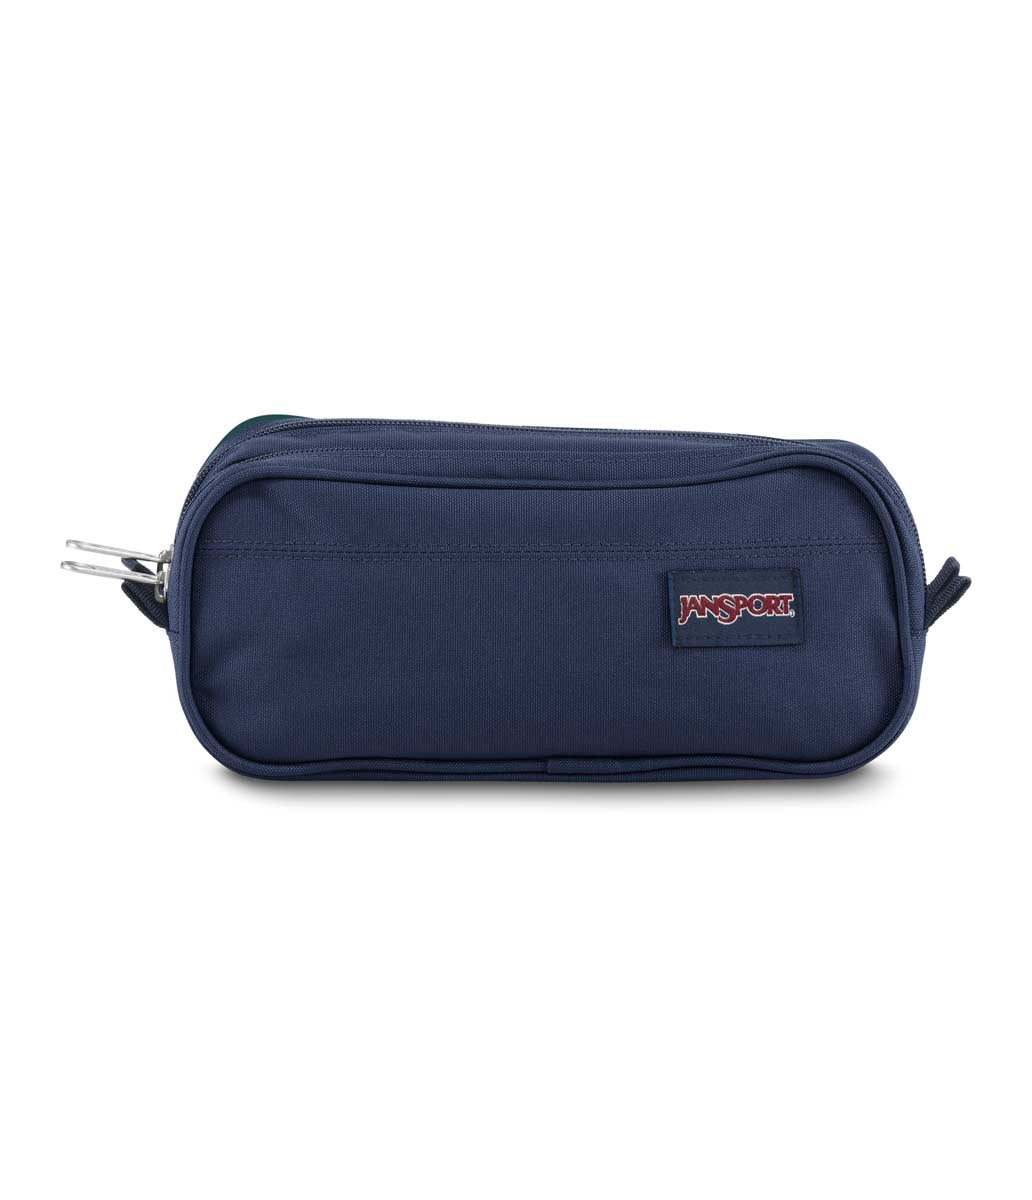 LARGE ACCESSORY POUCH - Navy